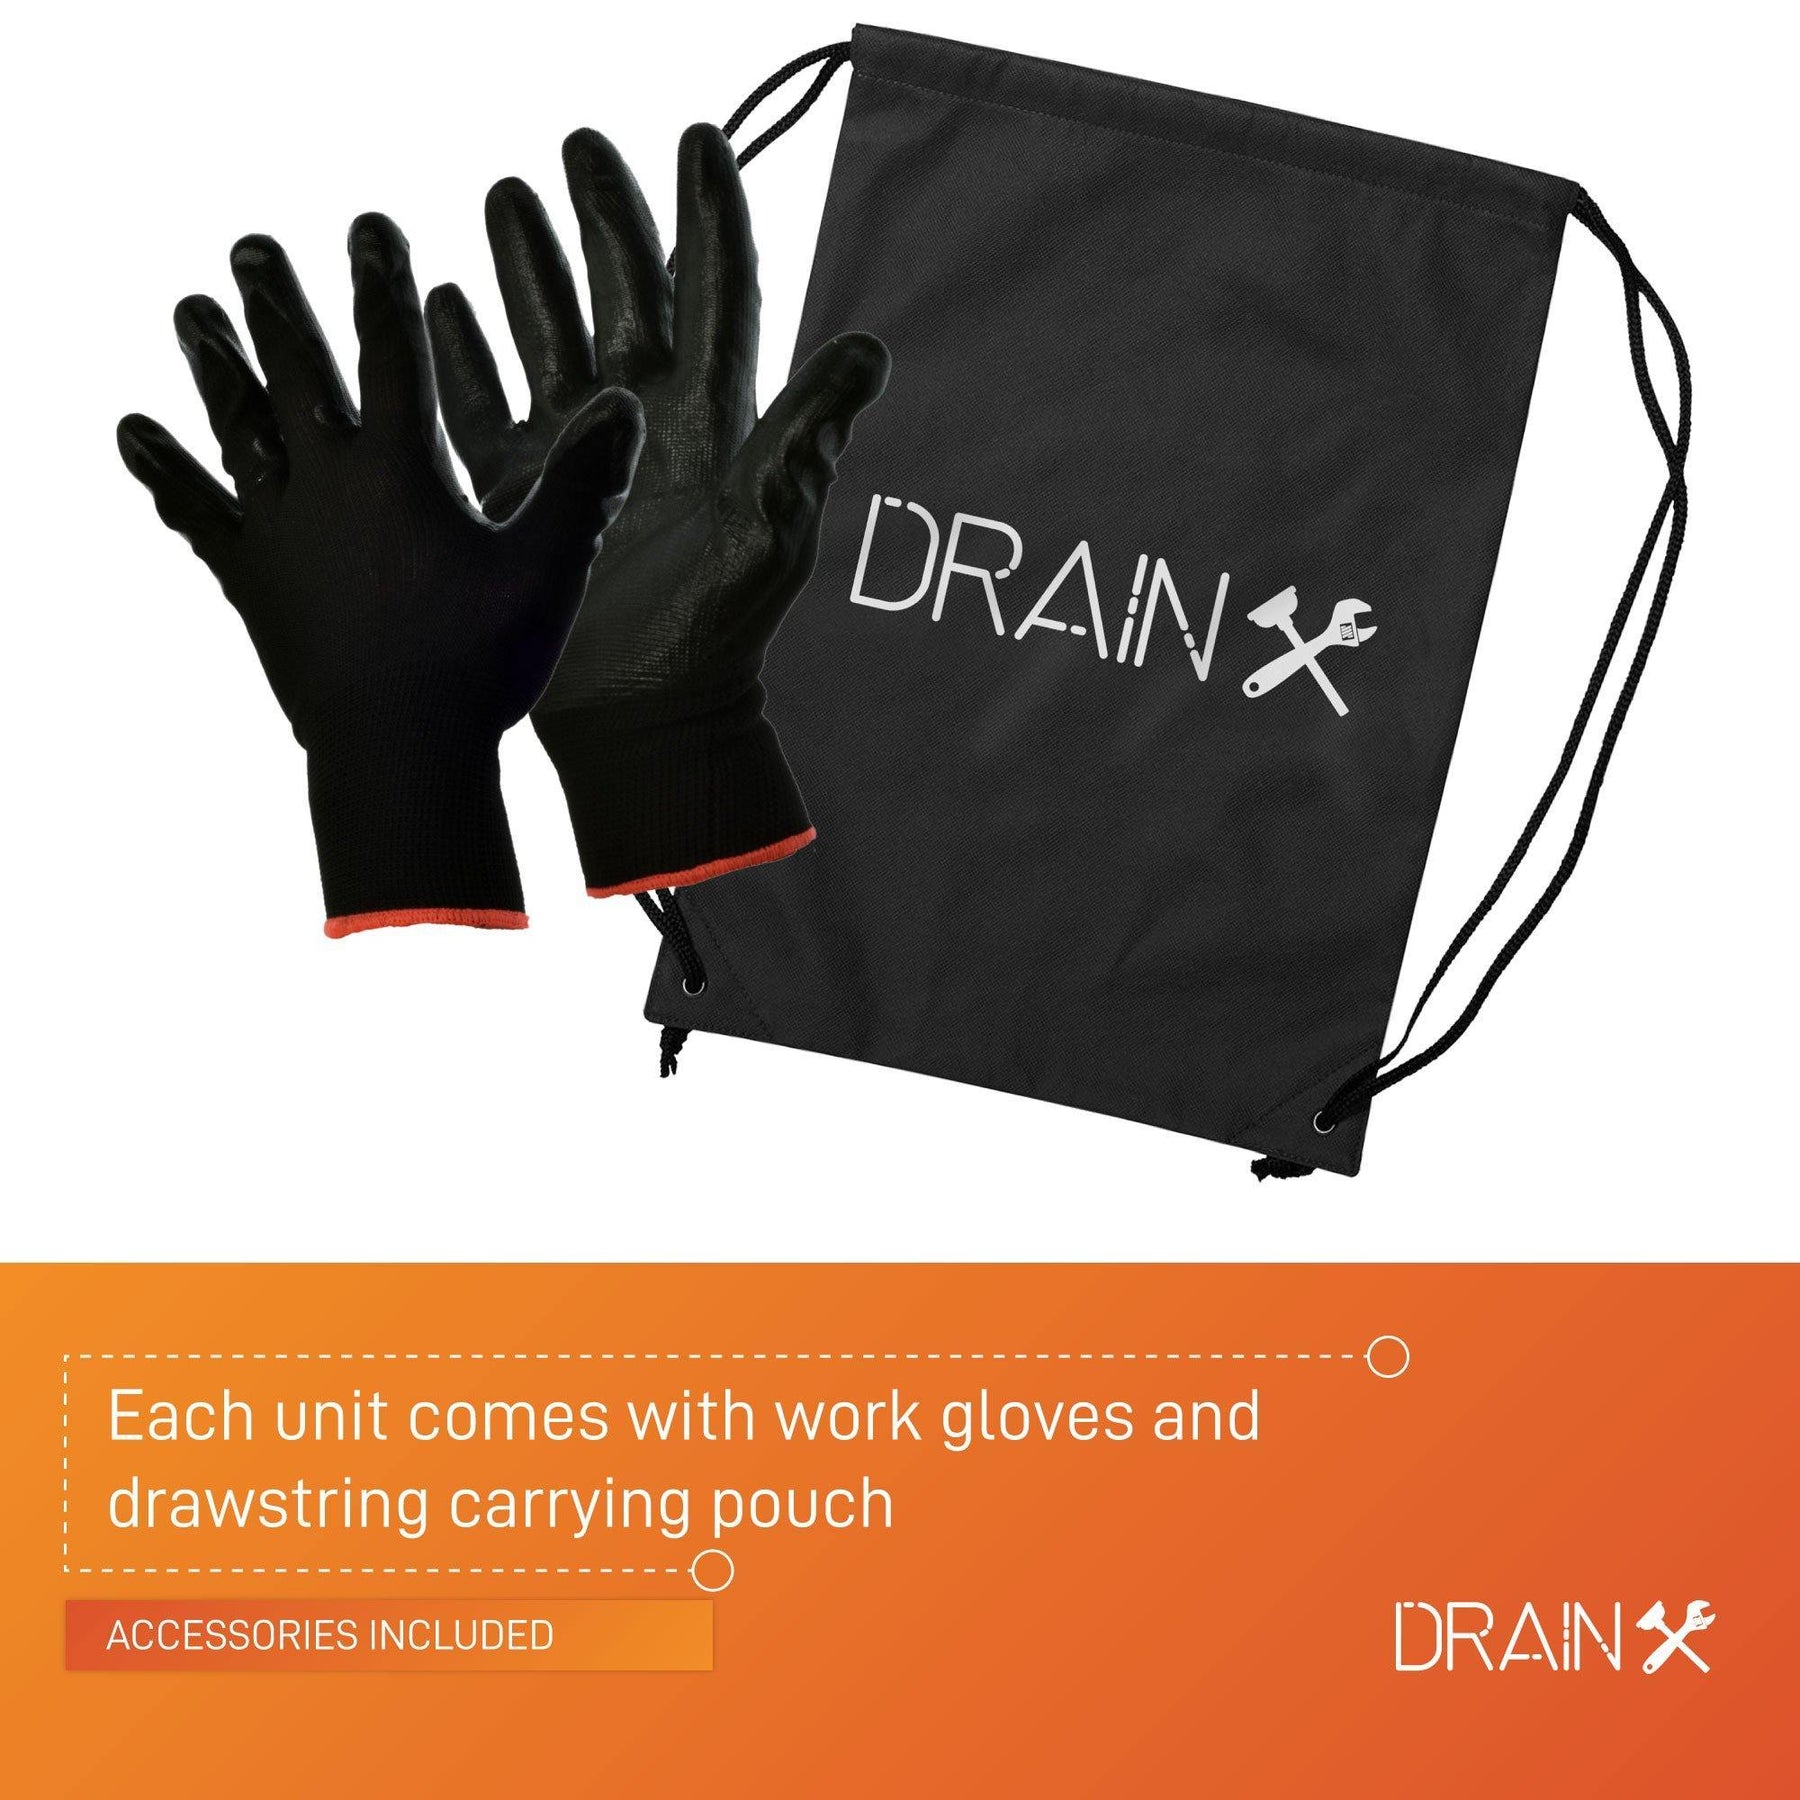 DrainX Pro 35-FT Steel Drum Auger Plumbing Snake | Drain Cleaning Cable  with Work Gloves and Storage Bag